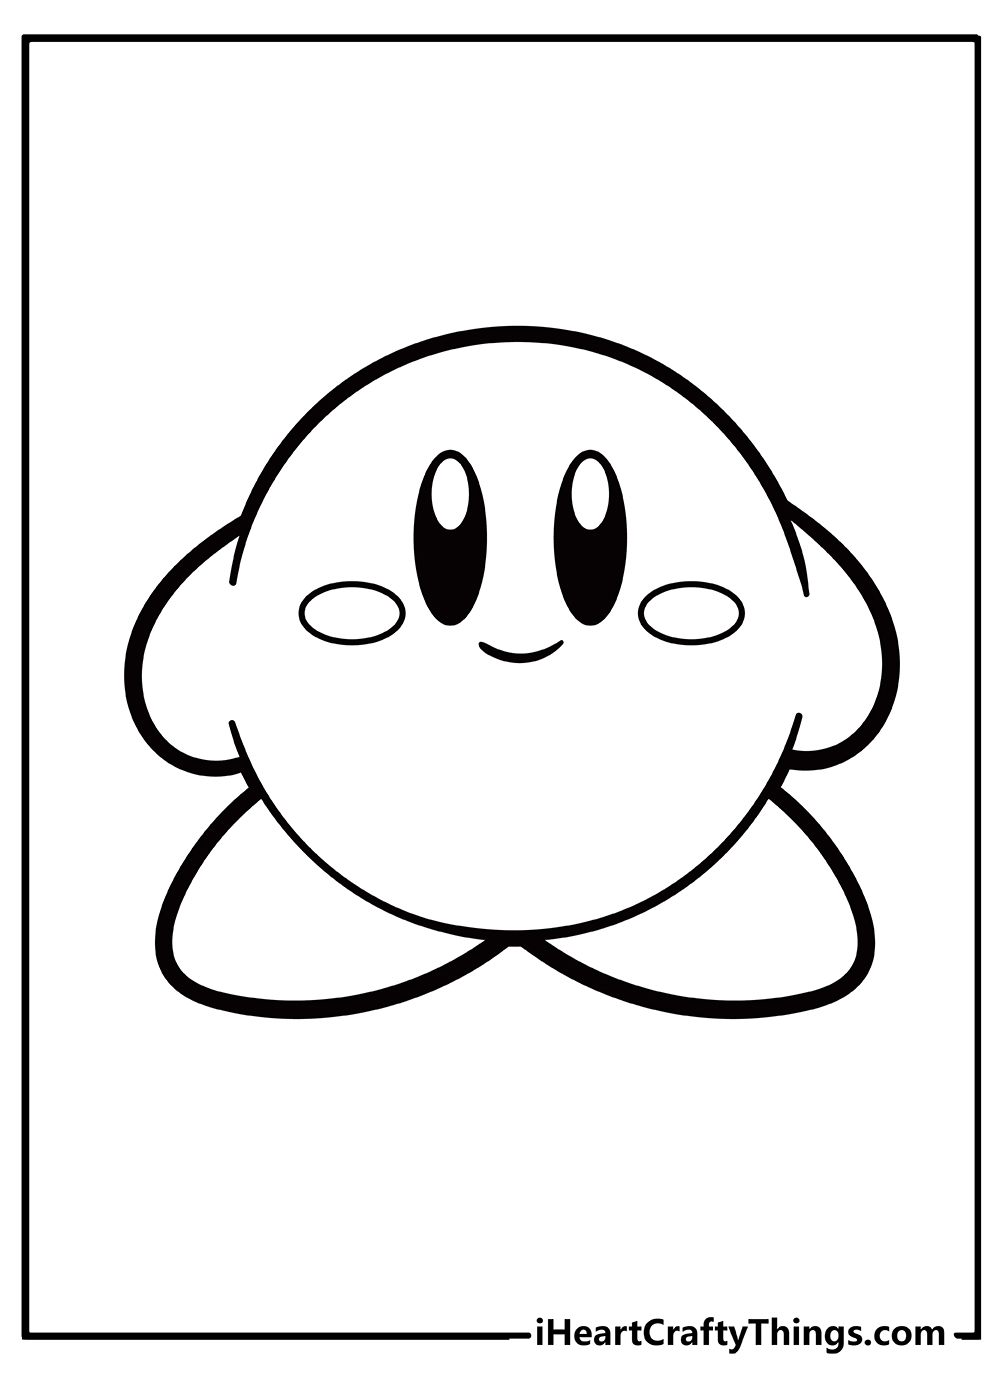 Kirby Coloring Pages for kids free download